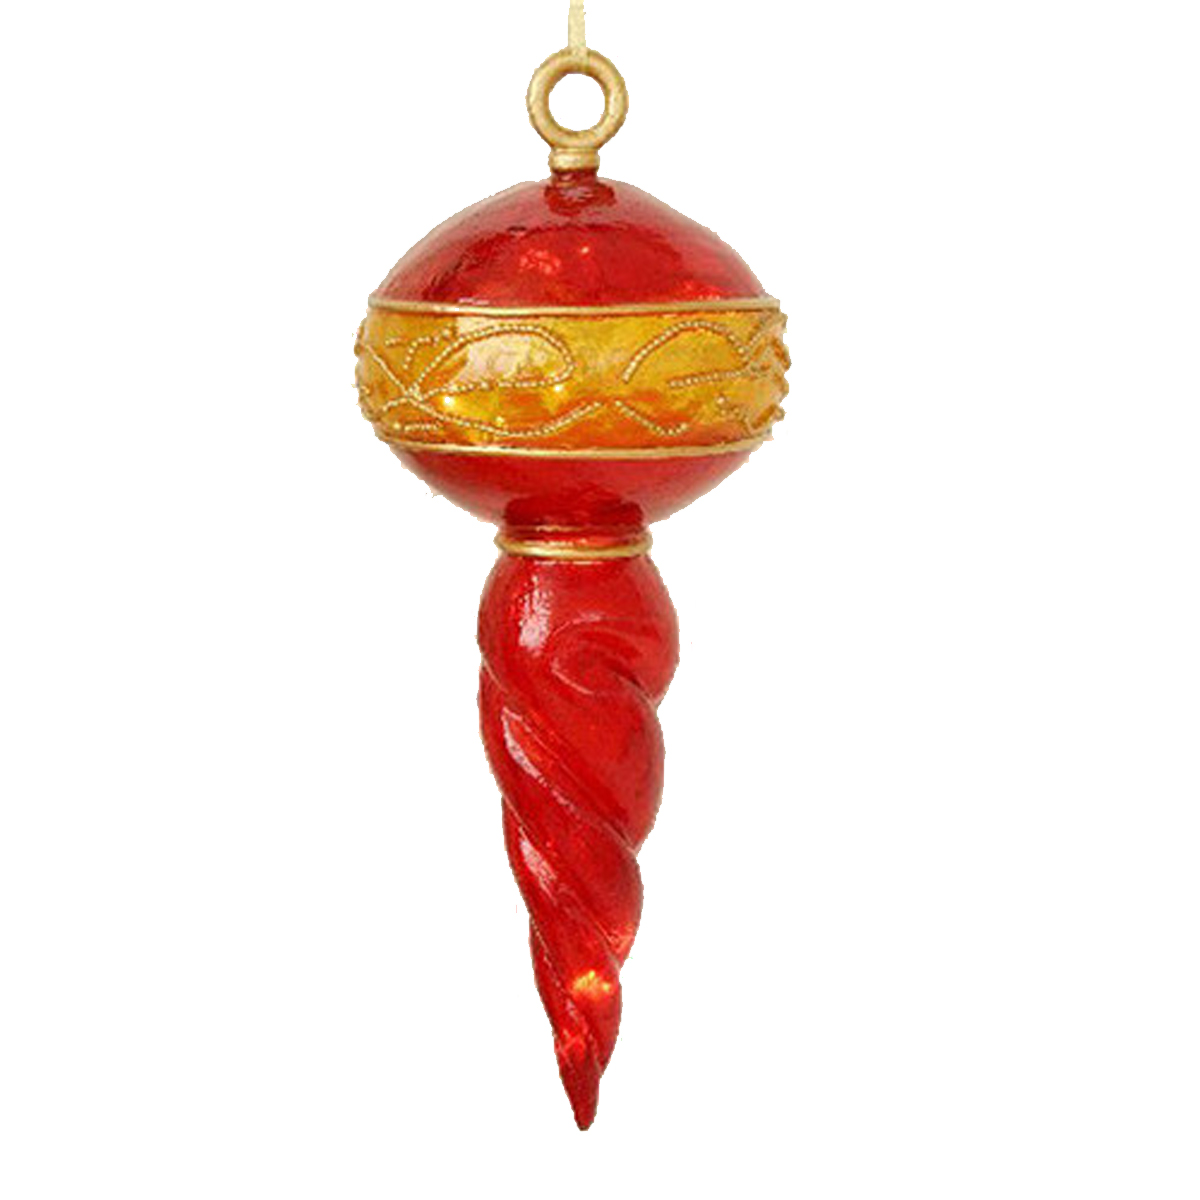 Illuminated Red with Gold Finial Ornament